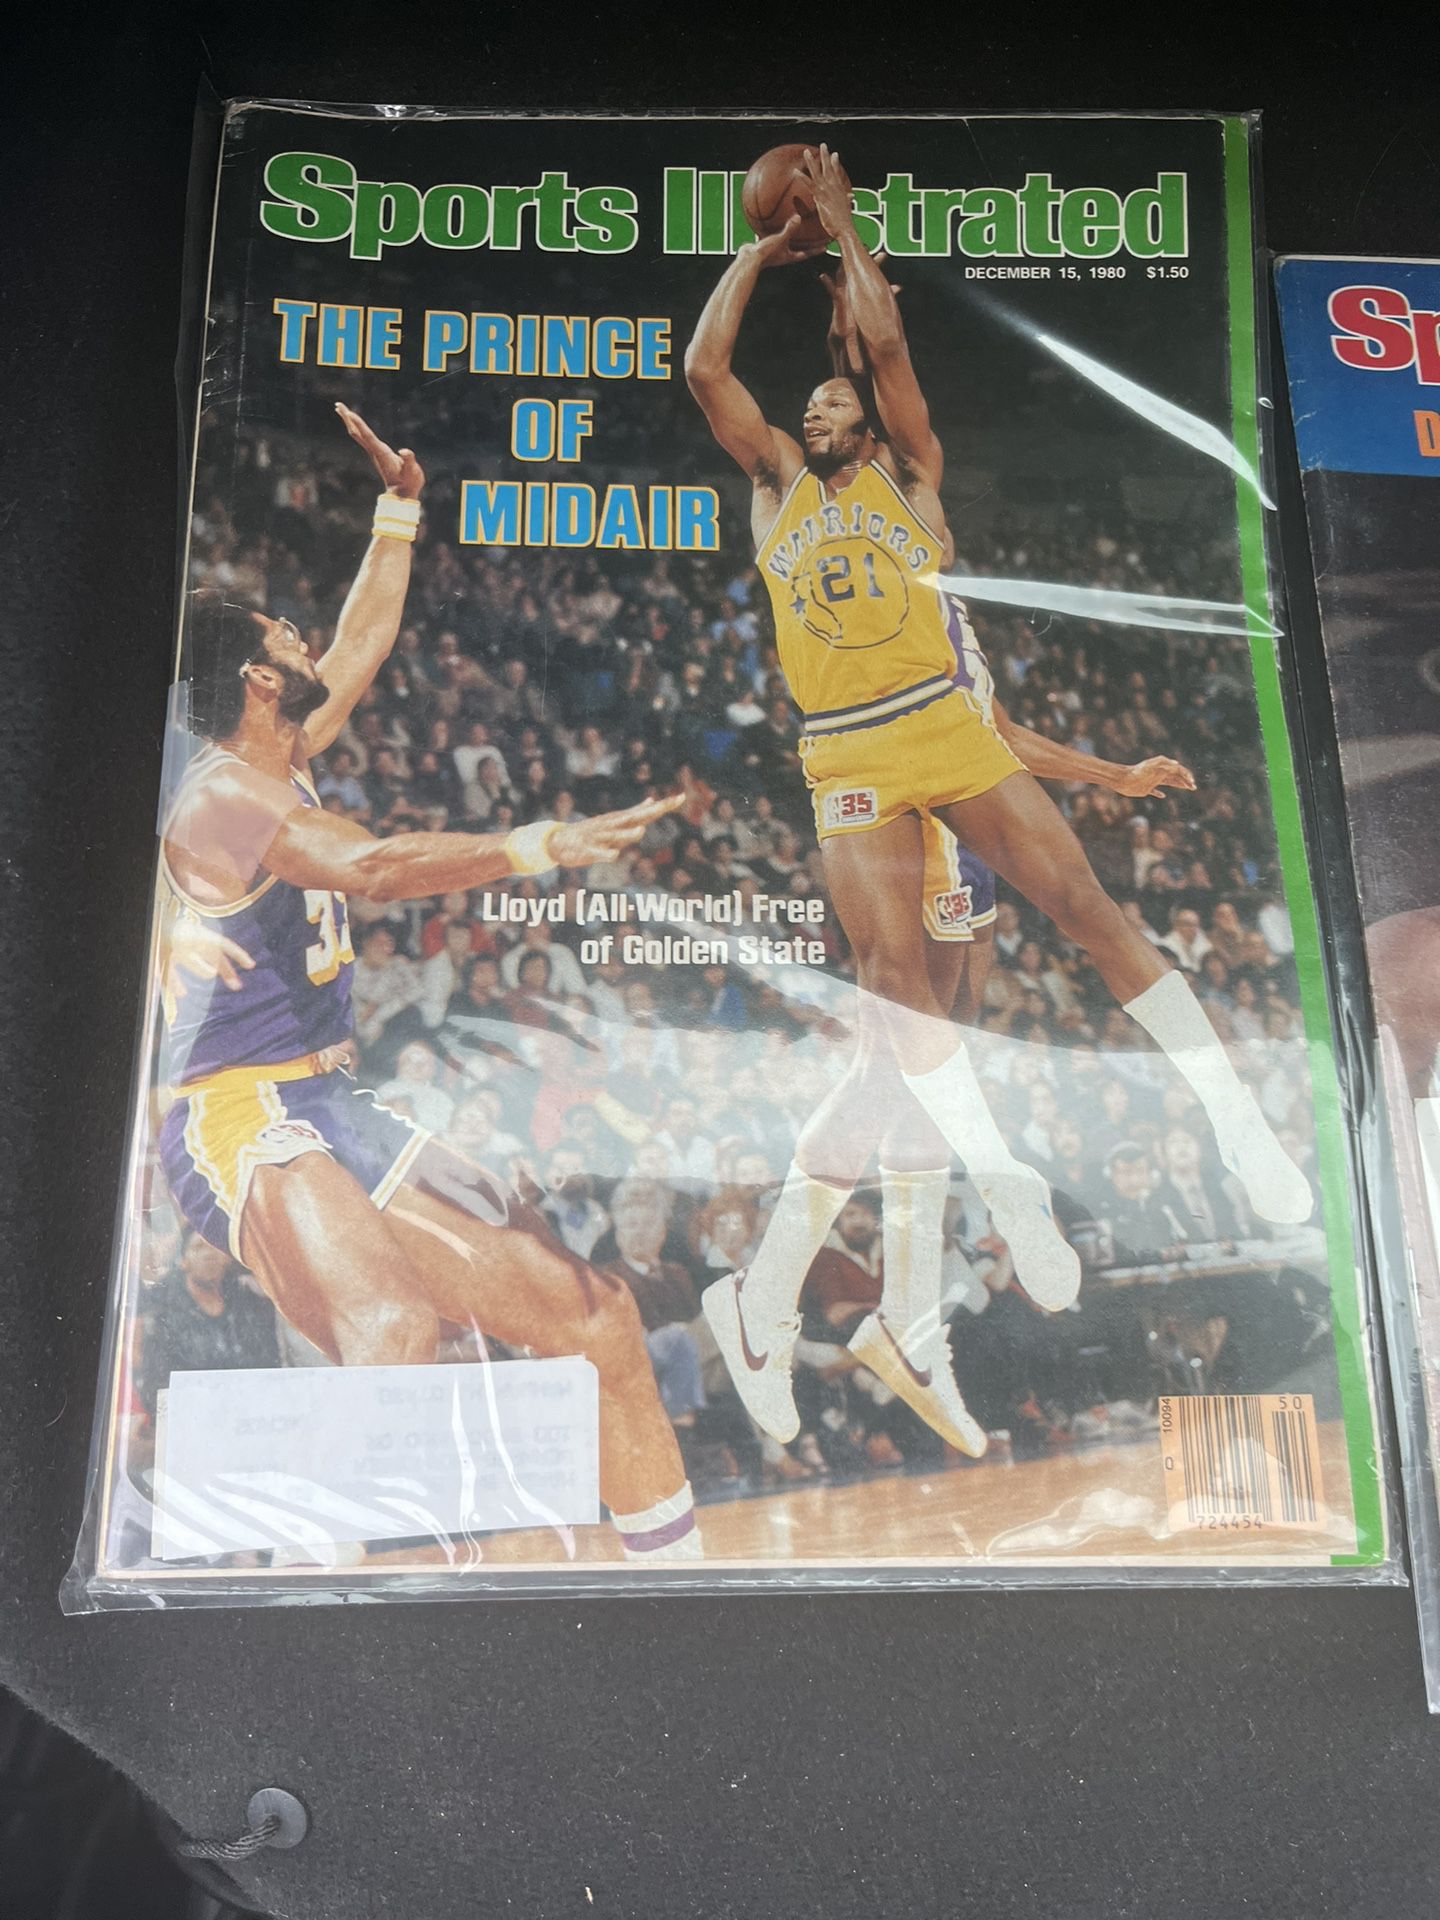 Sports Illustrated Price Of Midair